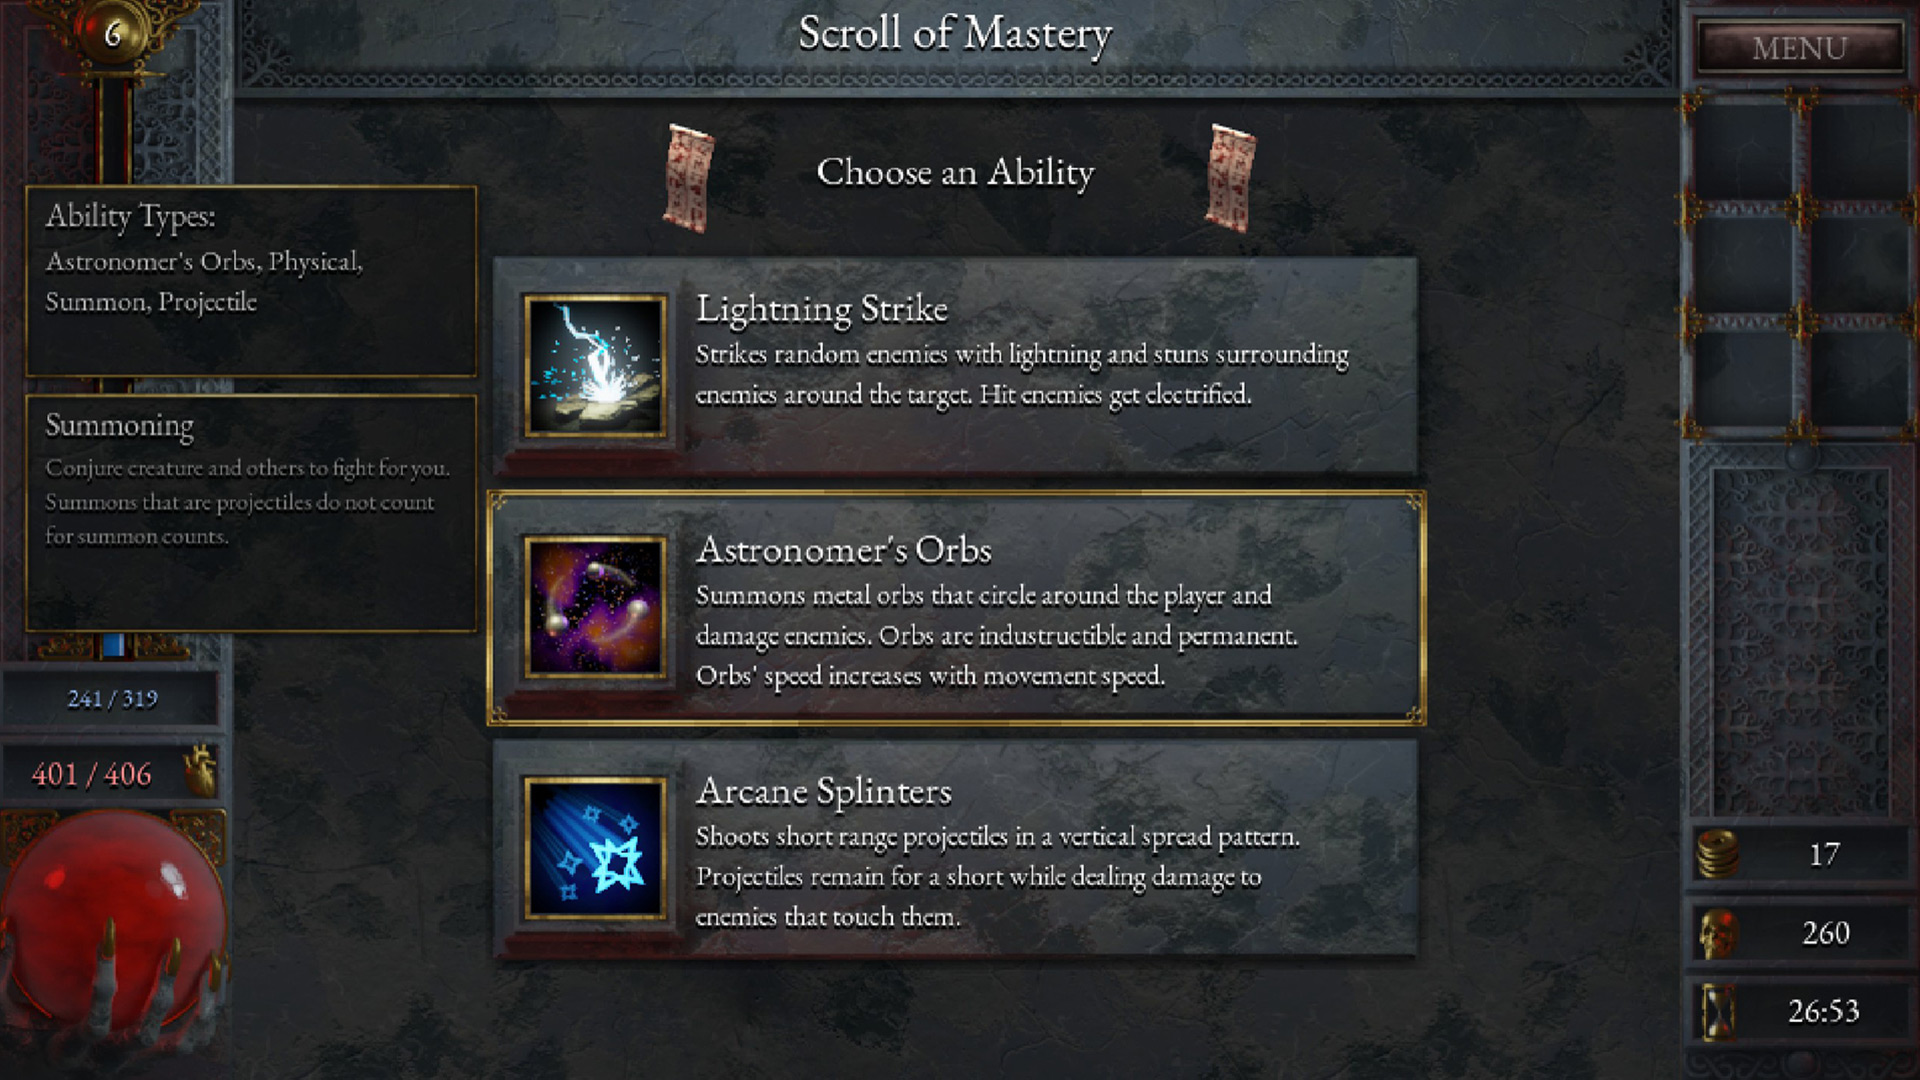 The Scroll of Mastery are essentially passive skills that help enhance your damage